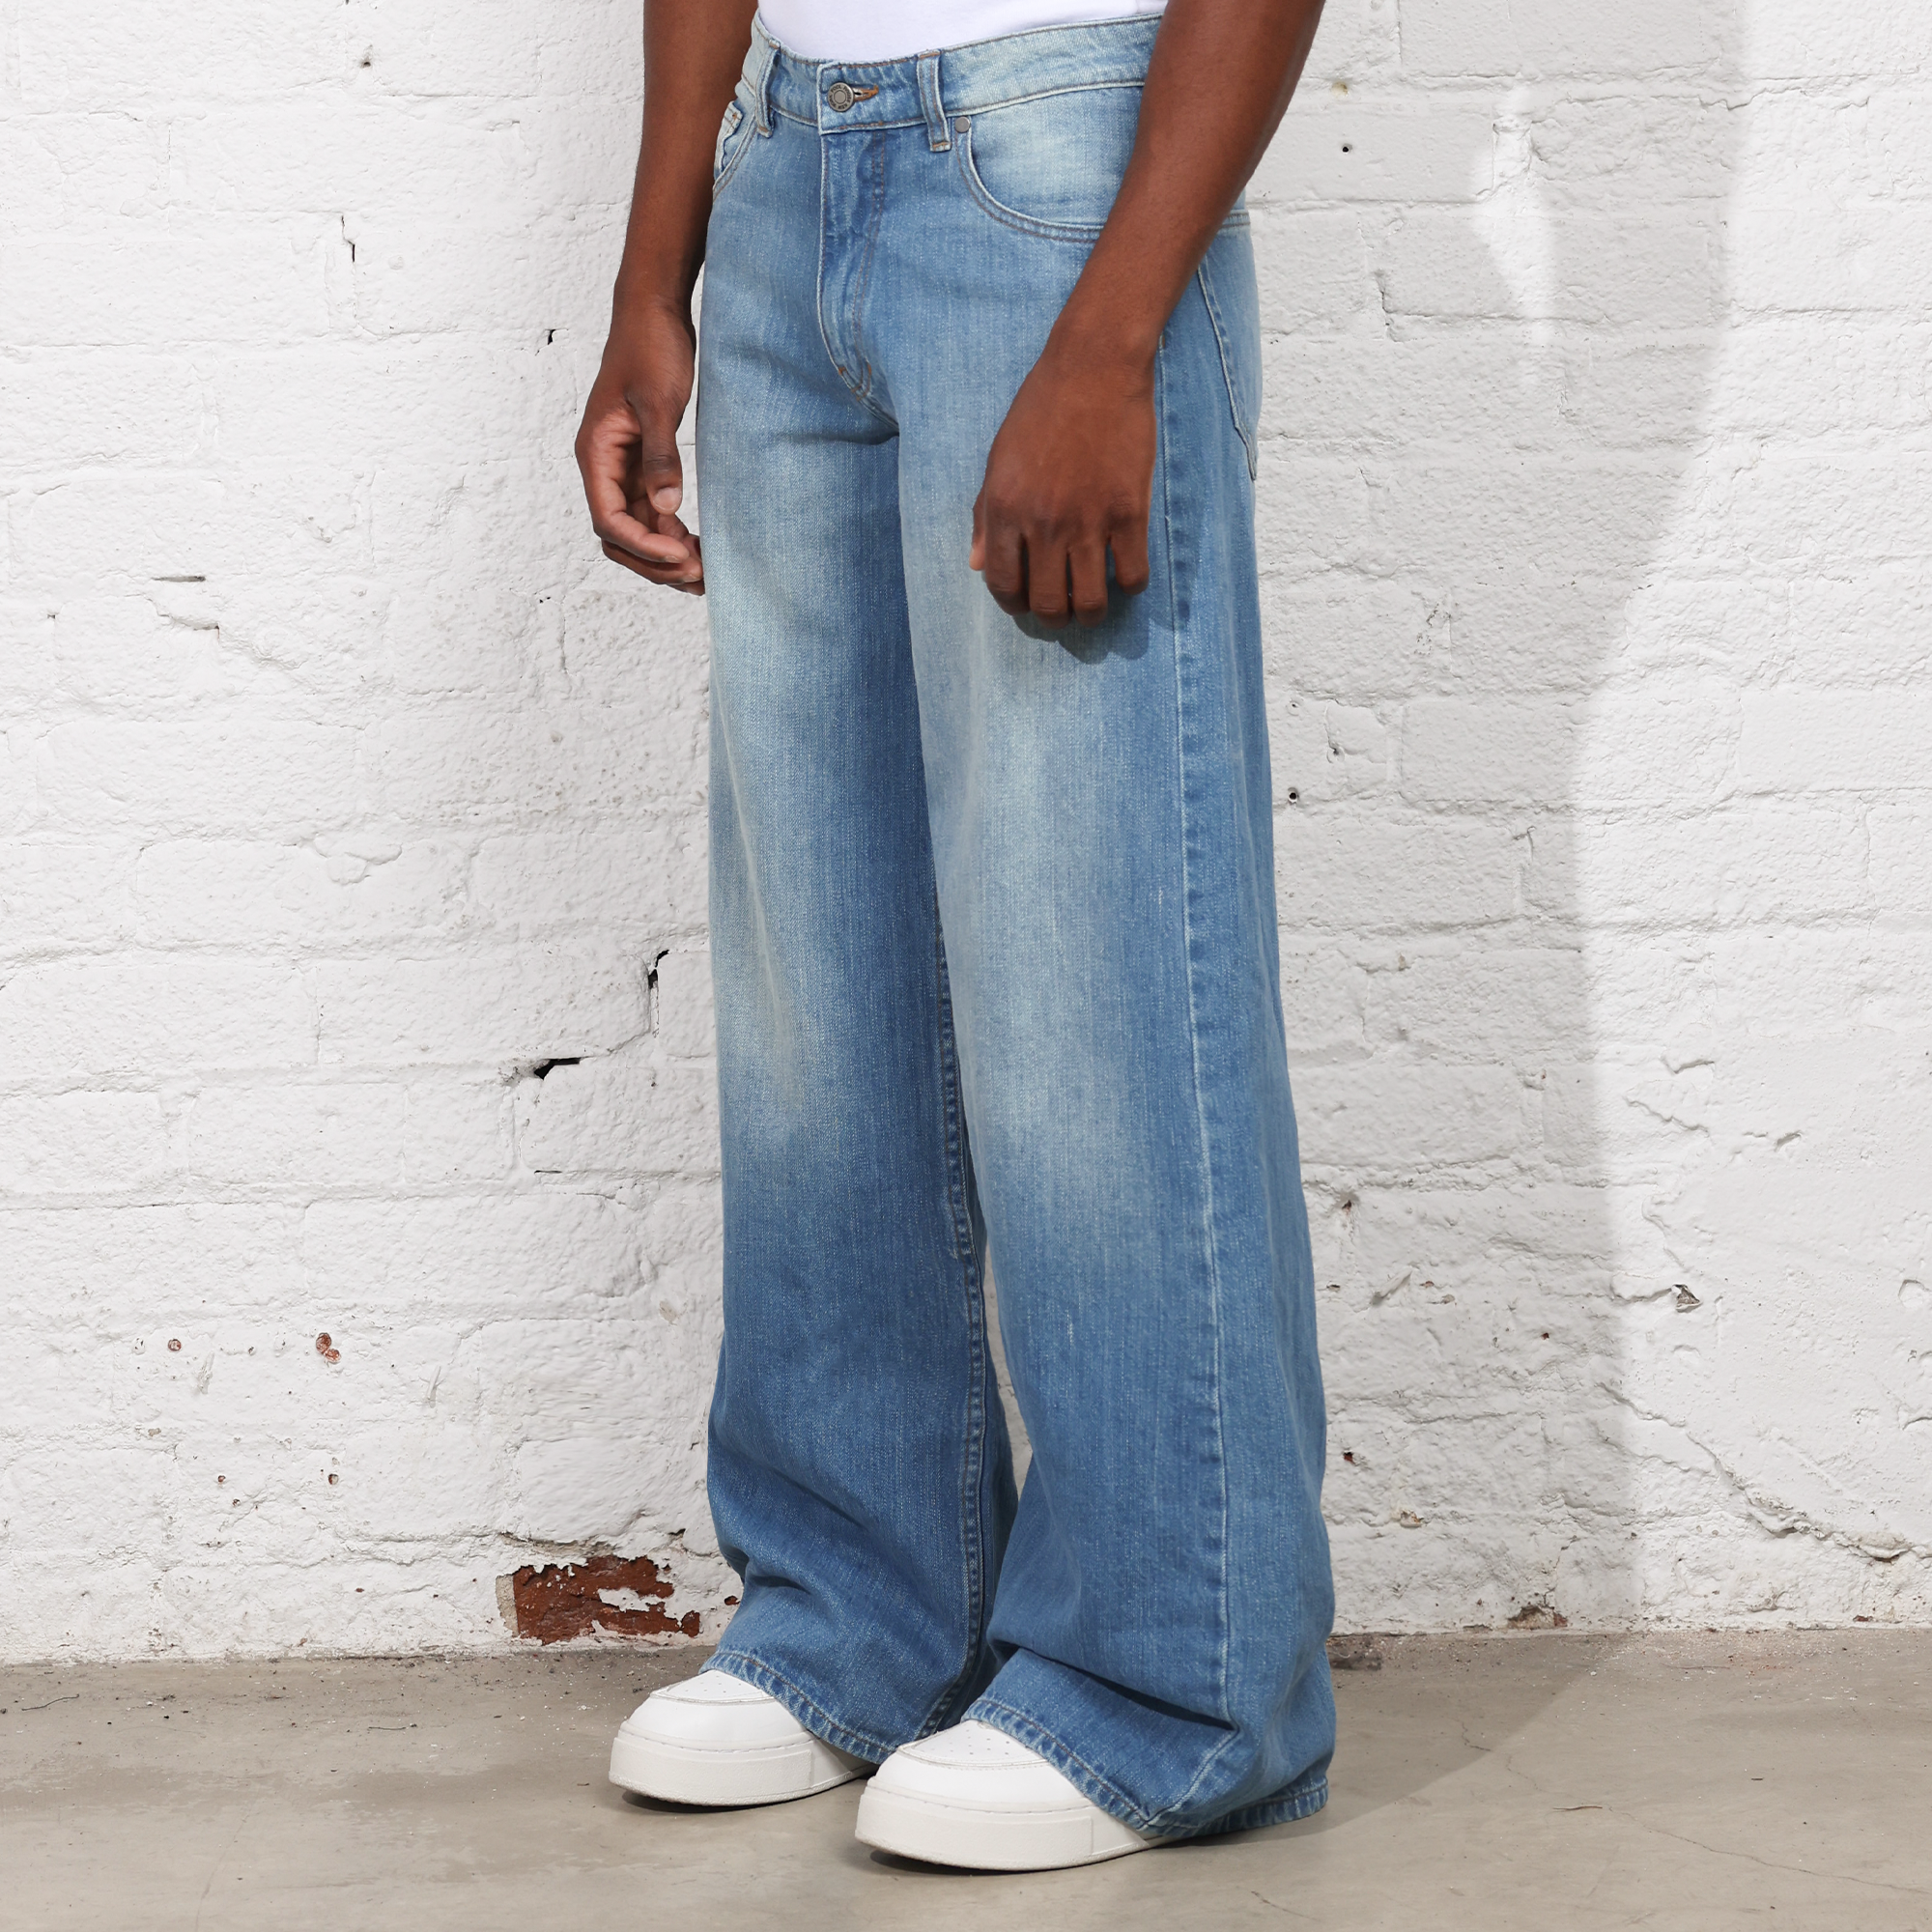 The Tokyo Dad Jeans